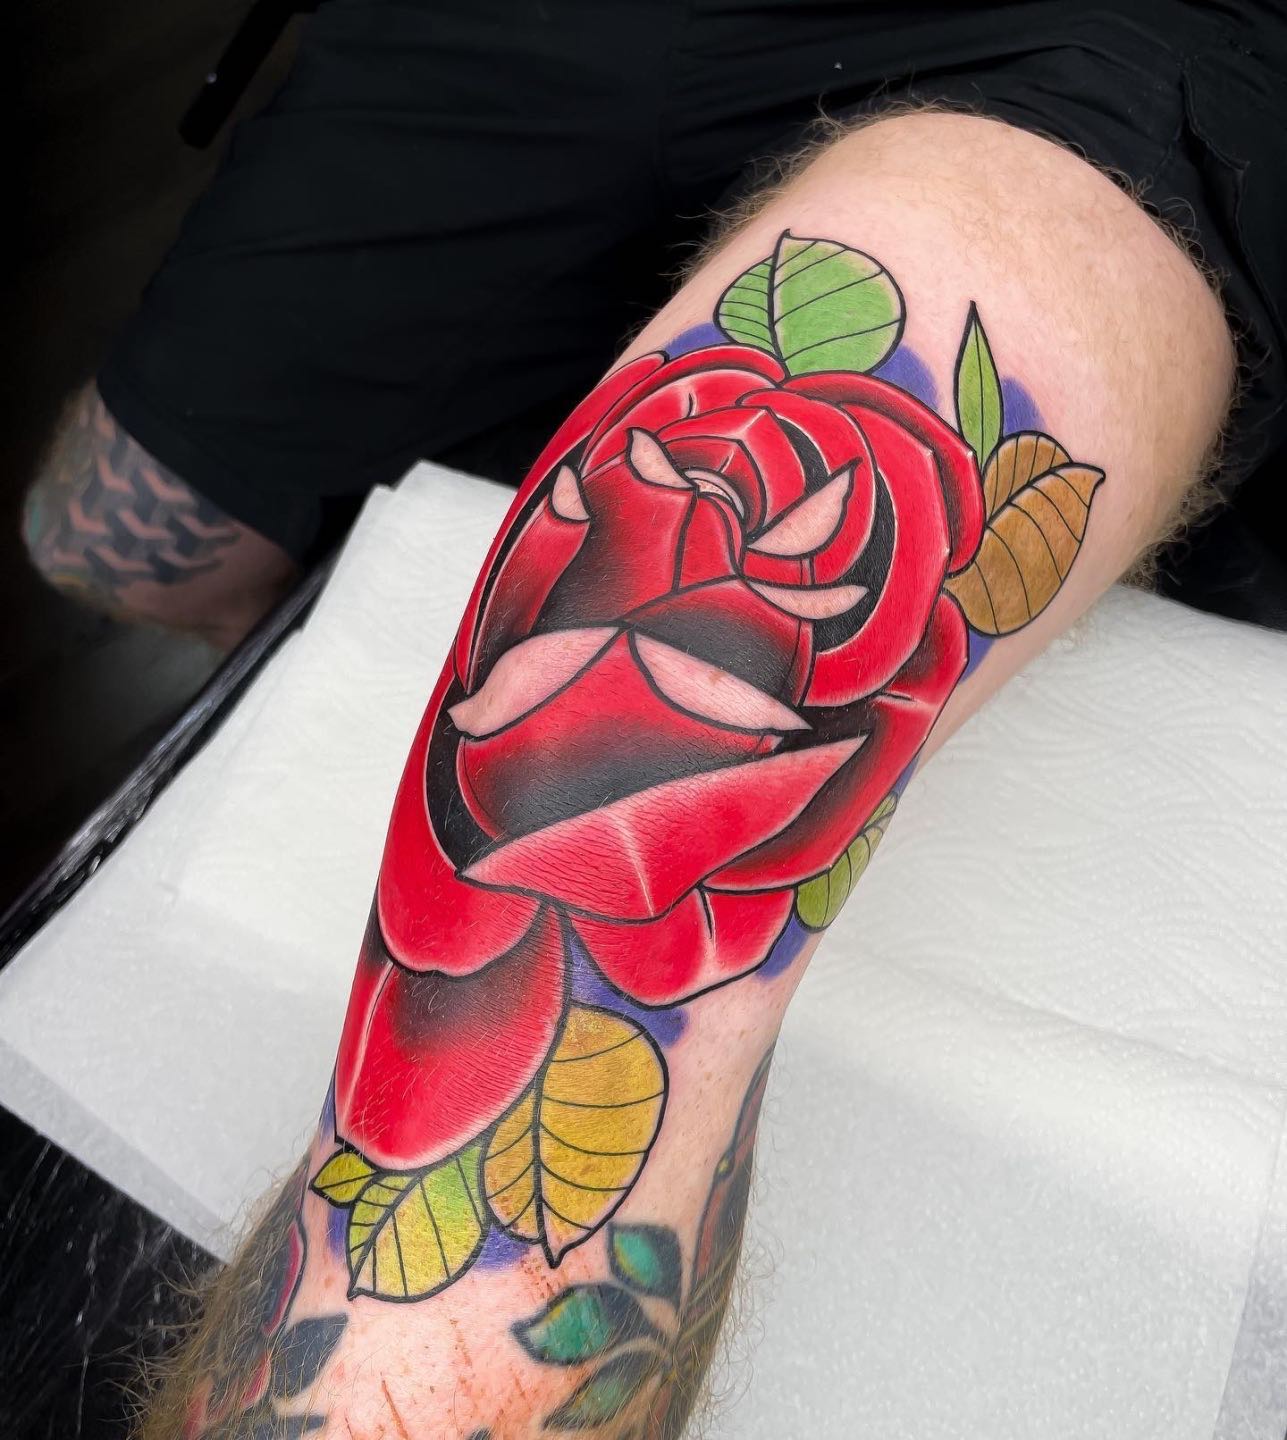 A bright red rose is often used to describe your love and your closeness to someone special in your life. A red tattoo can show your closeness and emotions. Why not dedicate it to your girl or daughter? Red is a color of passion, great for those who want to stay true to their feelings.